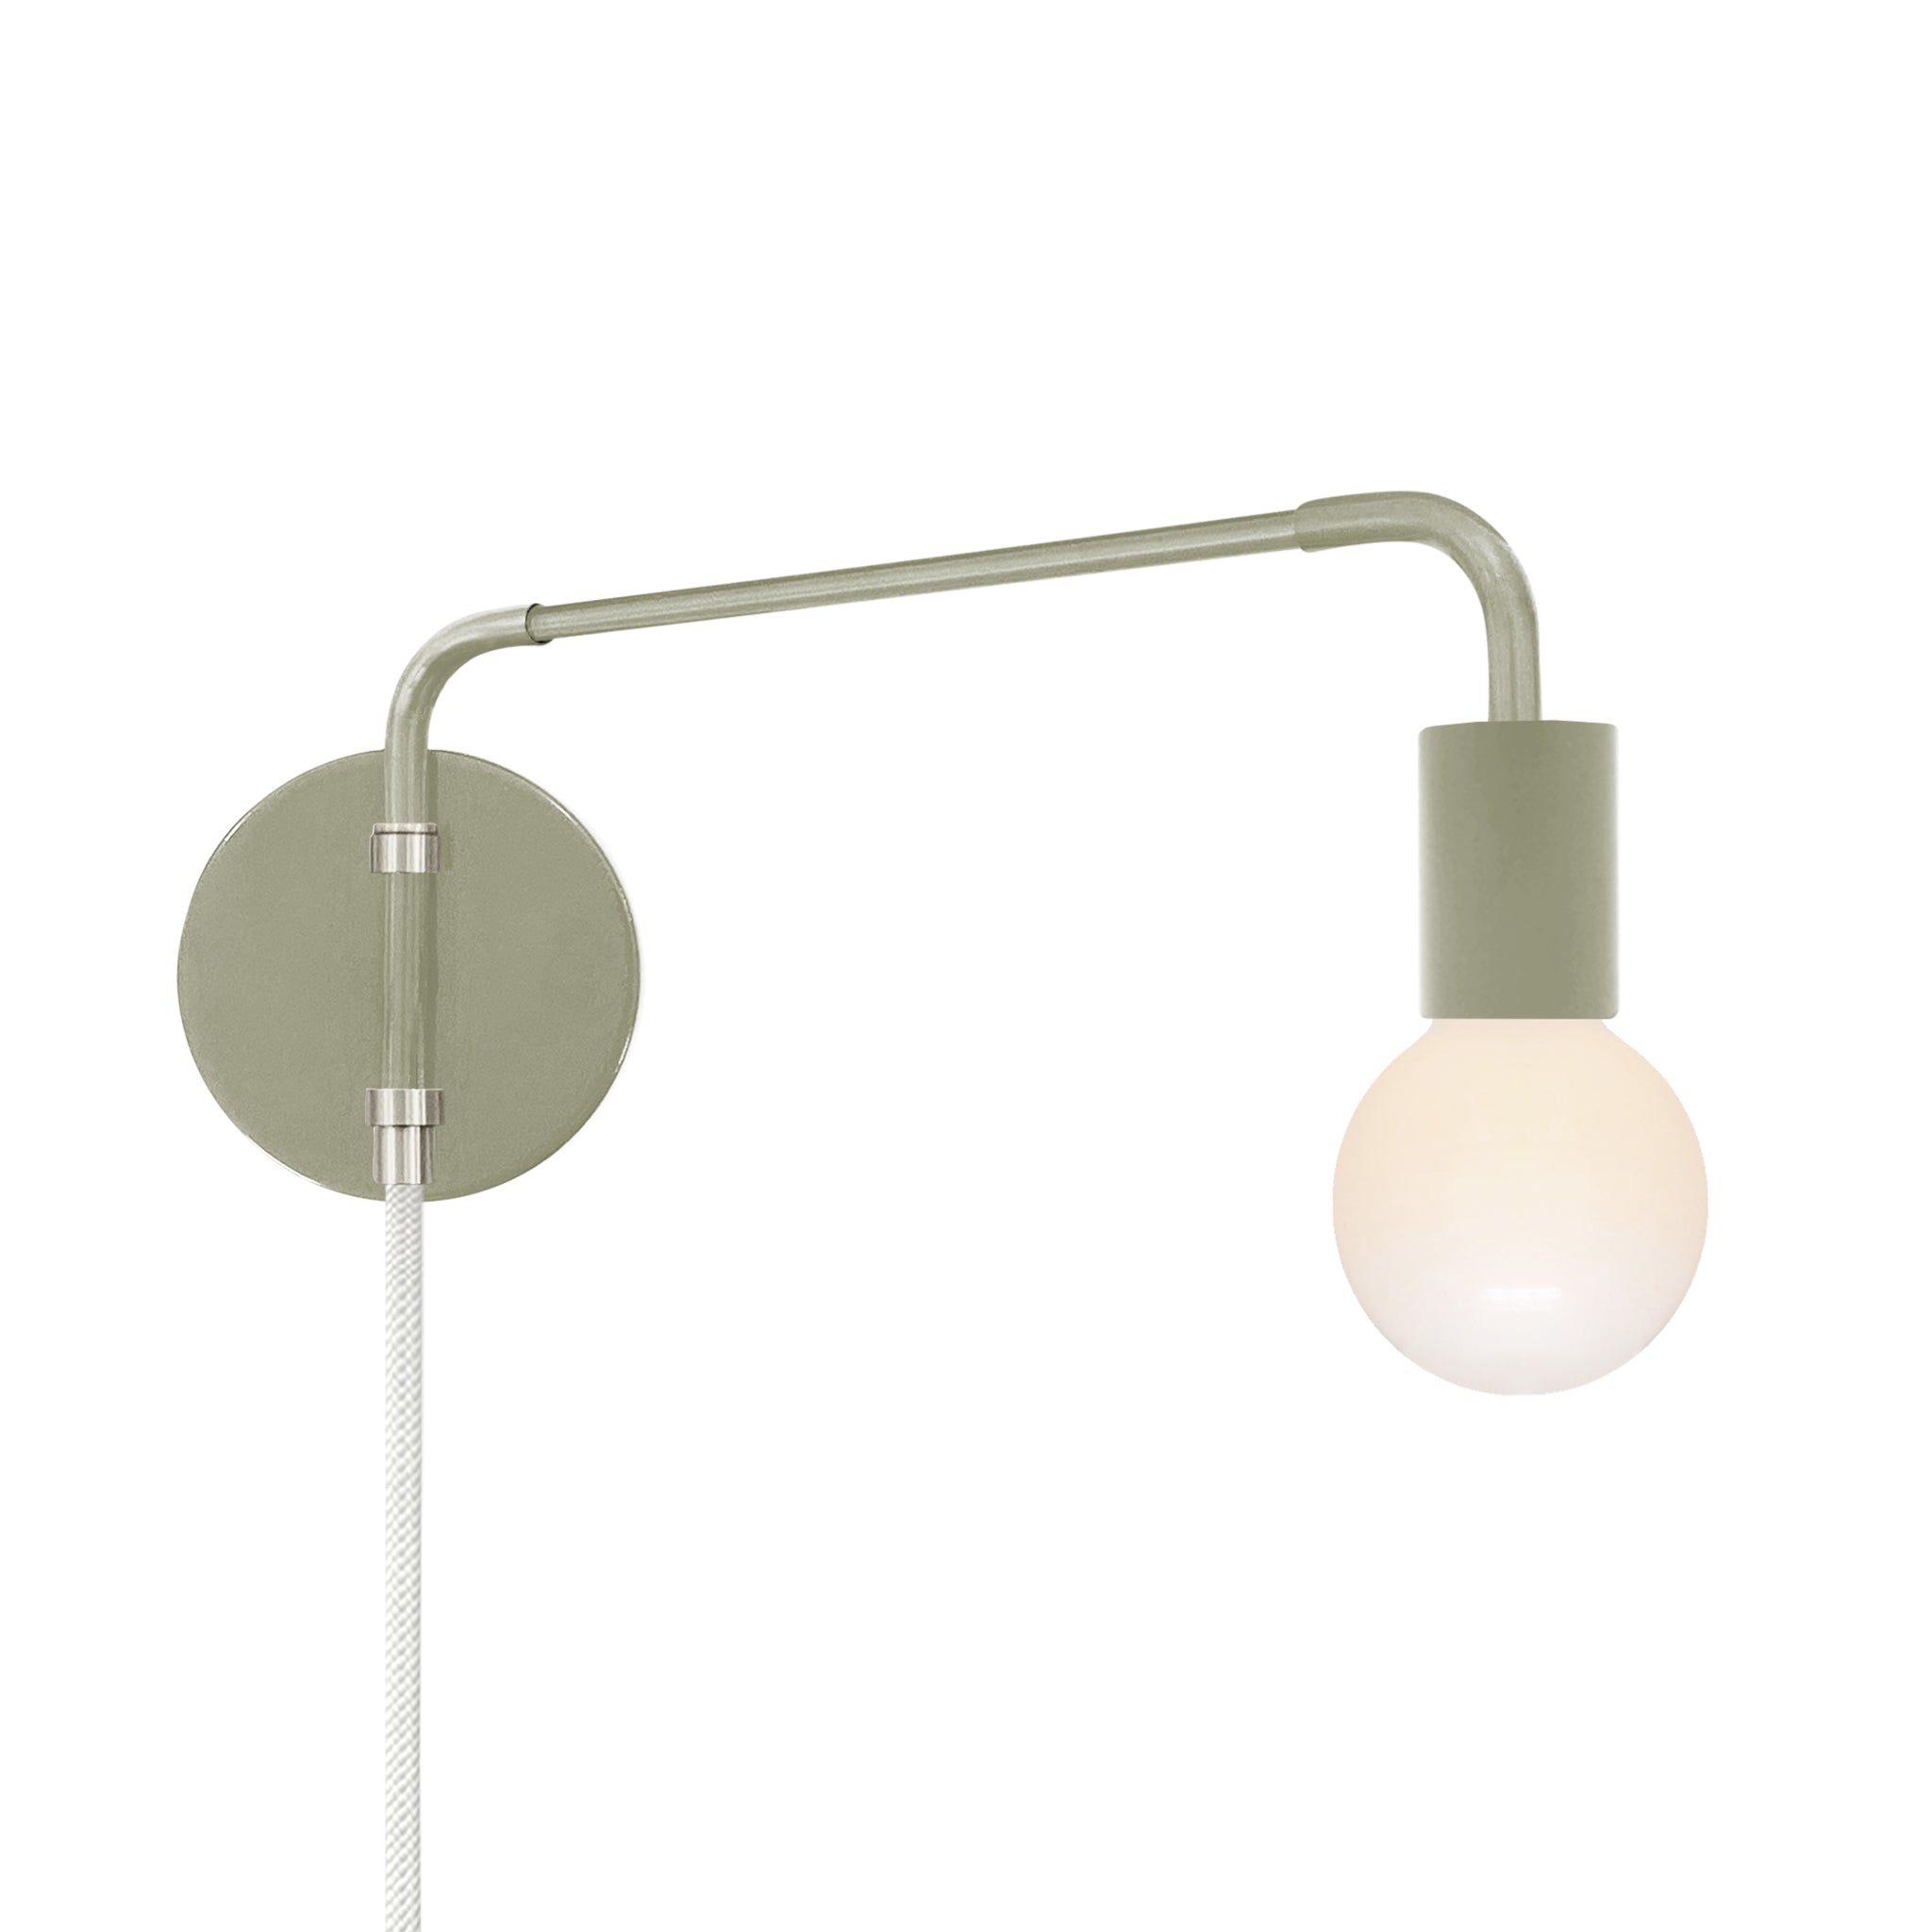 Nickel and spa color Sway plug-in sconce Dutton Brown lighting